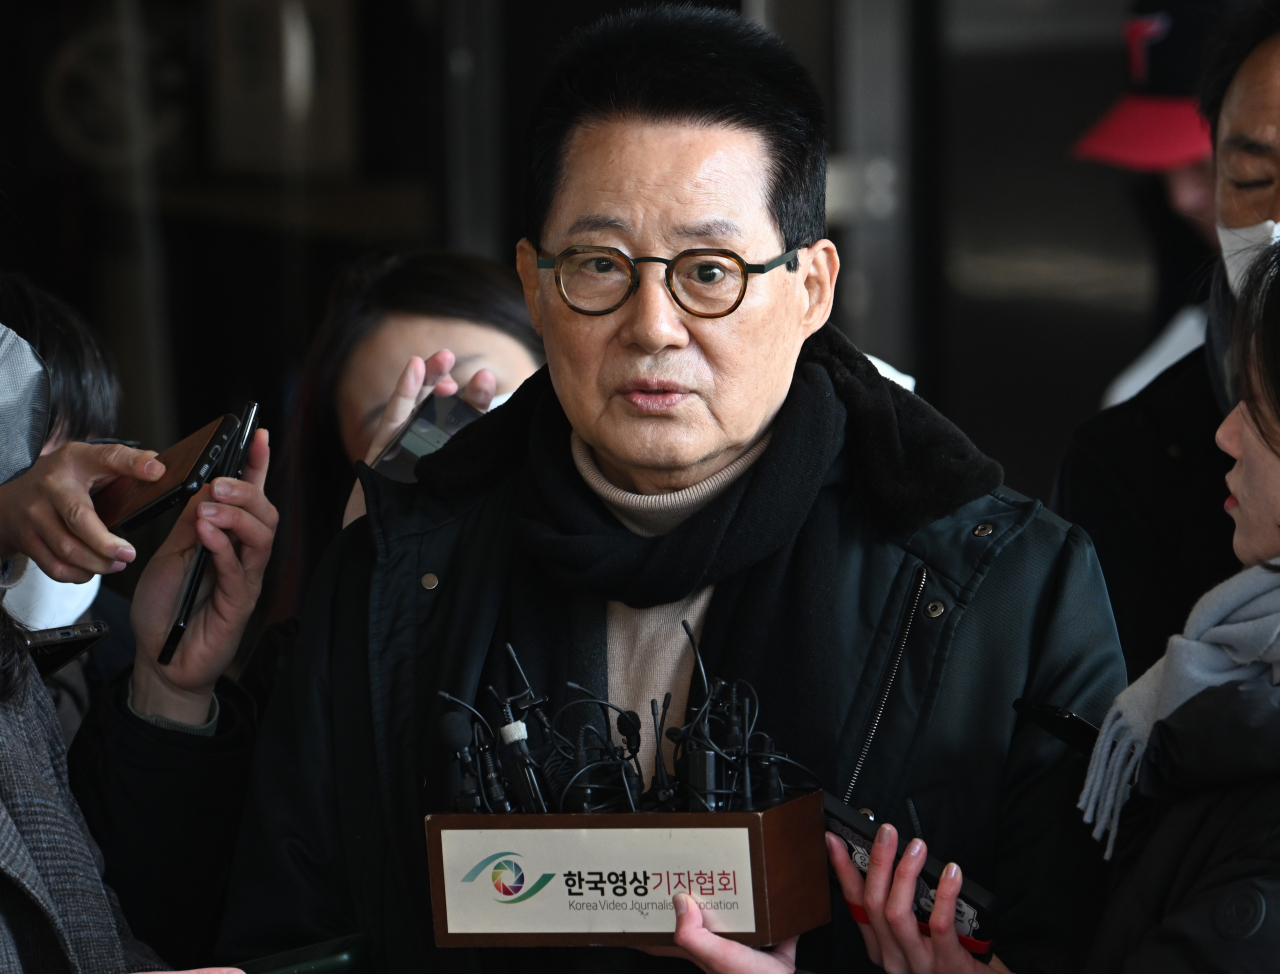 Park Jie-won, the former director of the National Intelligence Service, speaks to reporters outside the Seoul central district prosecutors’ office on Dec. 14, 2020. (Im Se-jun/The Korea Herald)